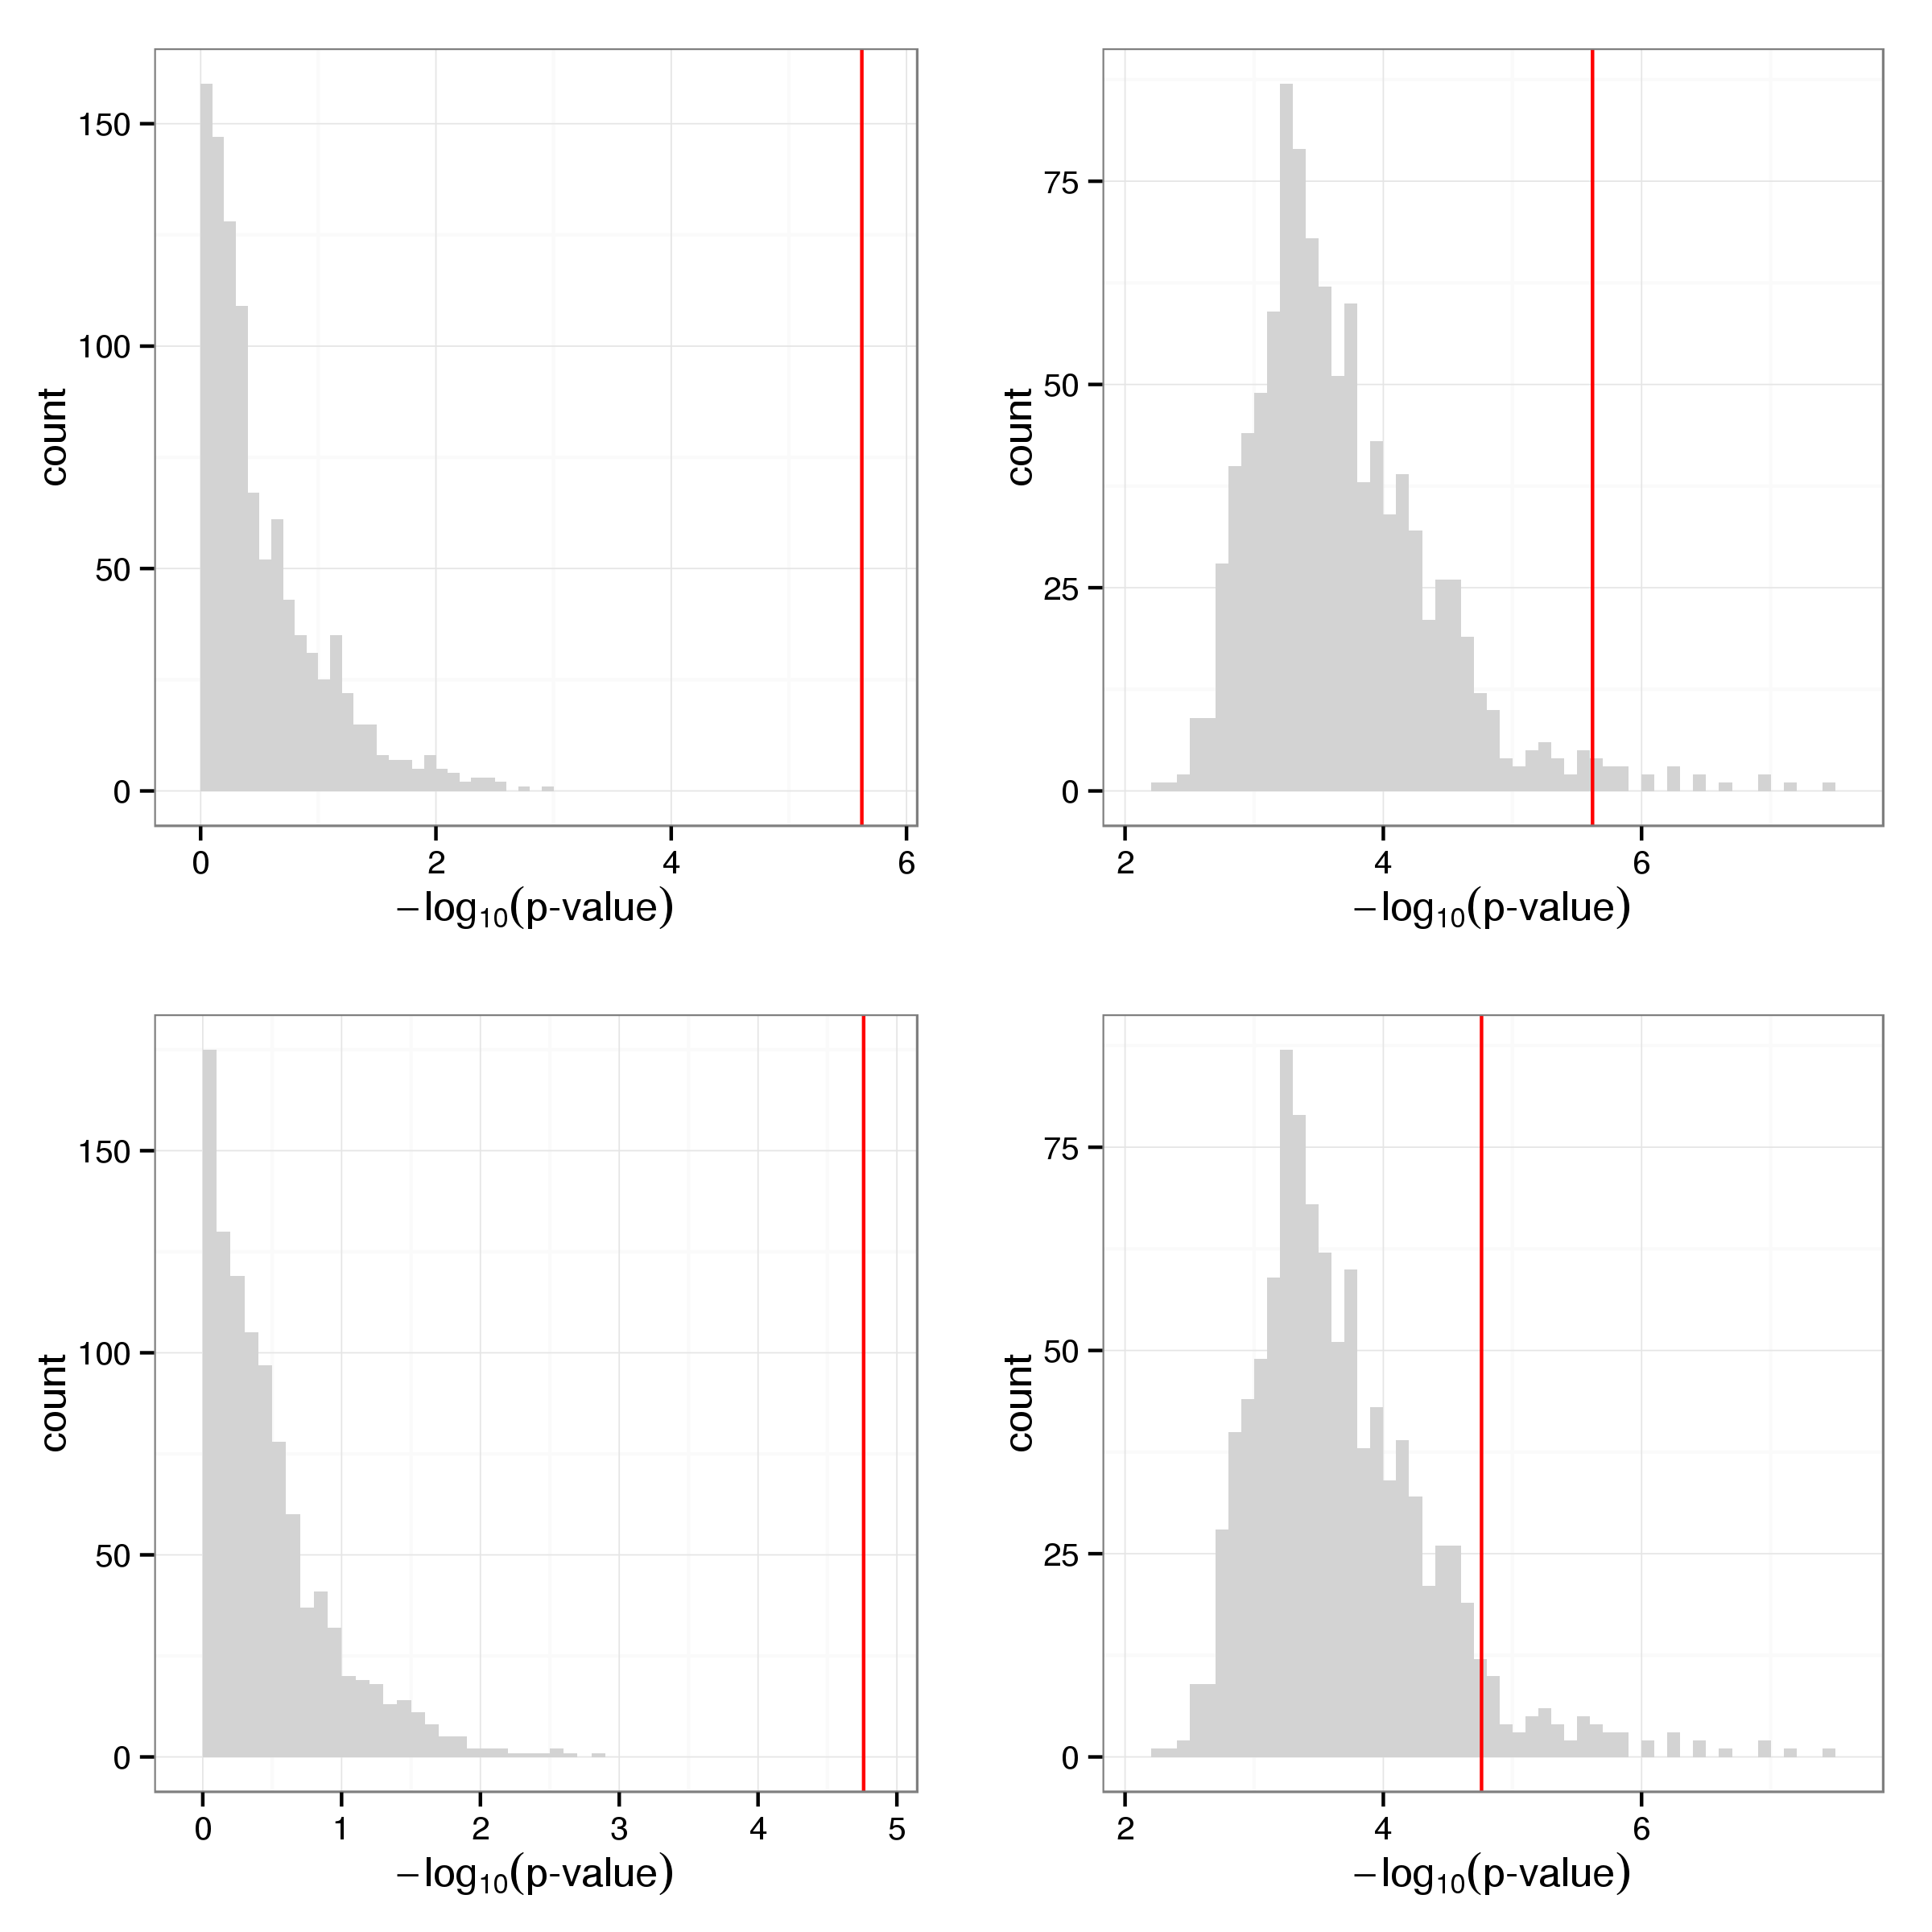 **Figure 14:** P-values observed after permutation of global response phenotype for SNPs rs10509407 (top) and rs12207548 (bottom). The distribution of p-values for each snp after permutation is shown on the left and the minimum p-value observed in each iteration across all SNPs on the right.